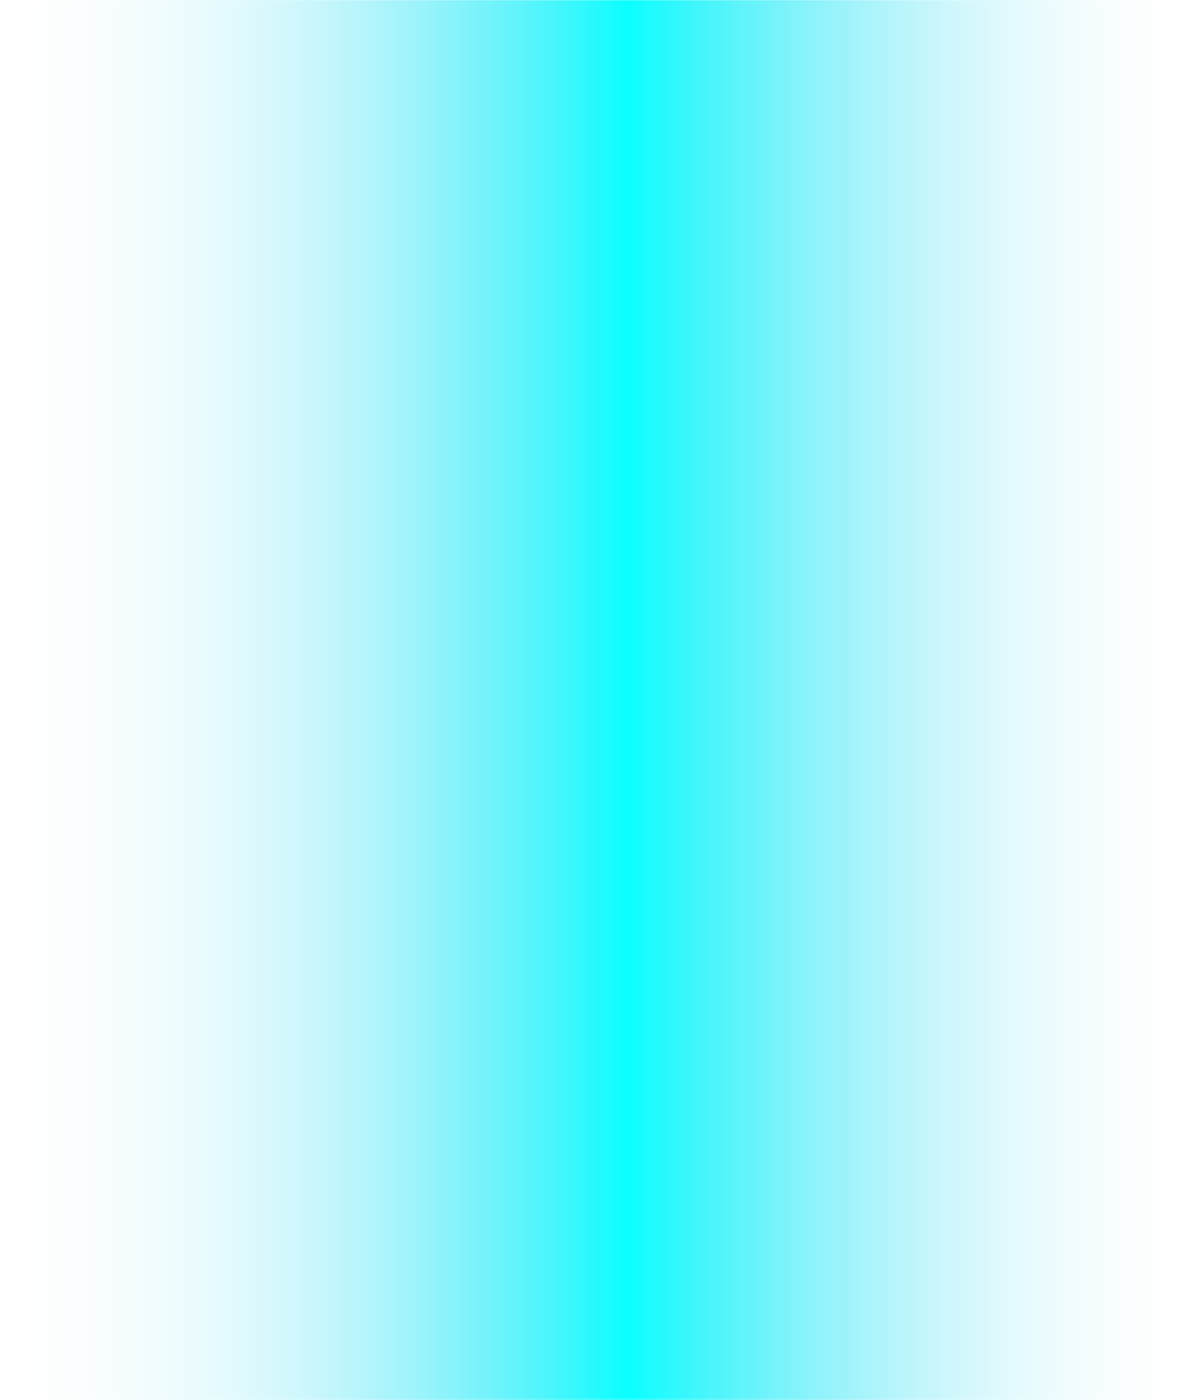 Gradient that fades to transparency blue